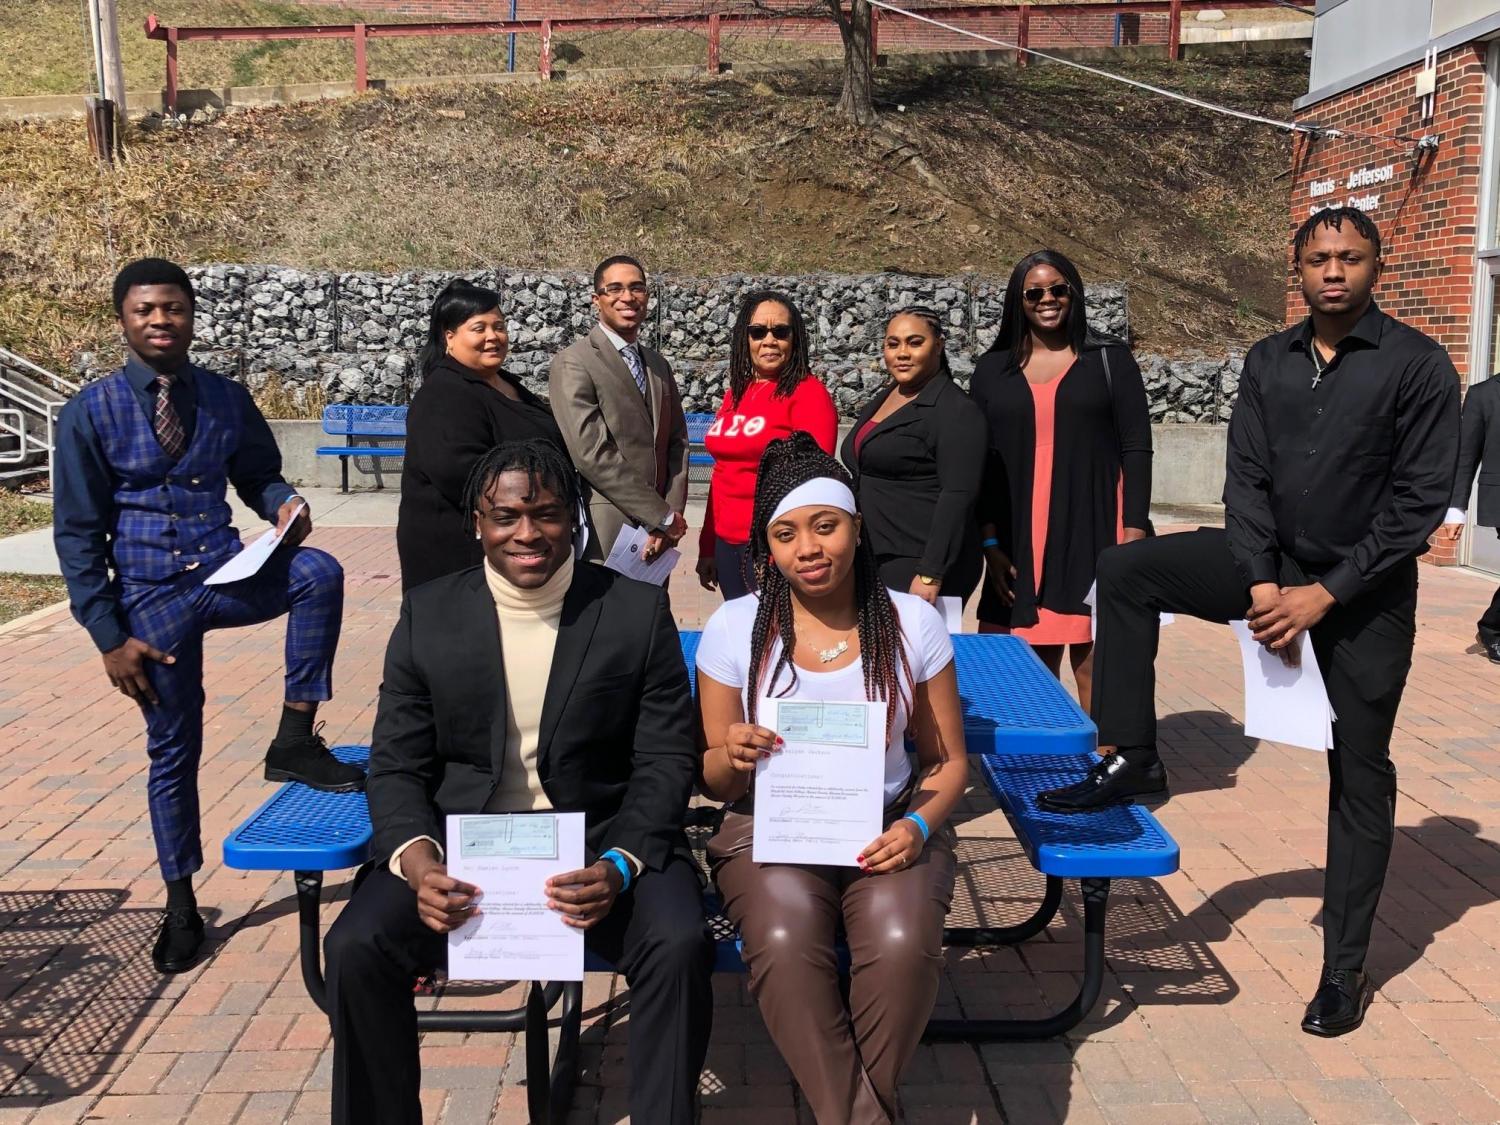 The first recipients of the “Terry Thompson and John Cardwell” scholarships are pictured at the recent Hatter Hall Scholarship Luncheon at Bluefield State College.  They are (seated, left-to-right) Damien Lynch, Aziyah Jackson, (standing, left-to-right) Michael Acheampong, Michelle Lawson, Kashif Alston, Terry Thompson (BSC retiree for whom, with John Cardwell, the scholarship was named), Patrice Sterling, Nia Lumpkins, and Desmond Freeman.  BSC alumna Tosin and Yesimii Falasinnu pledged $100,000 to create